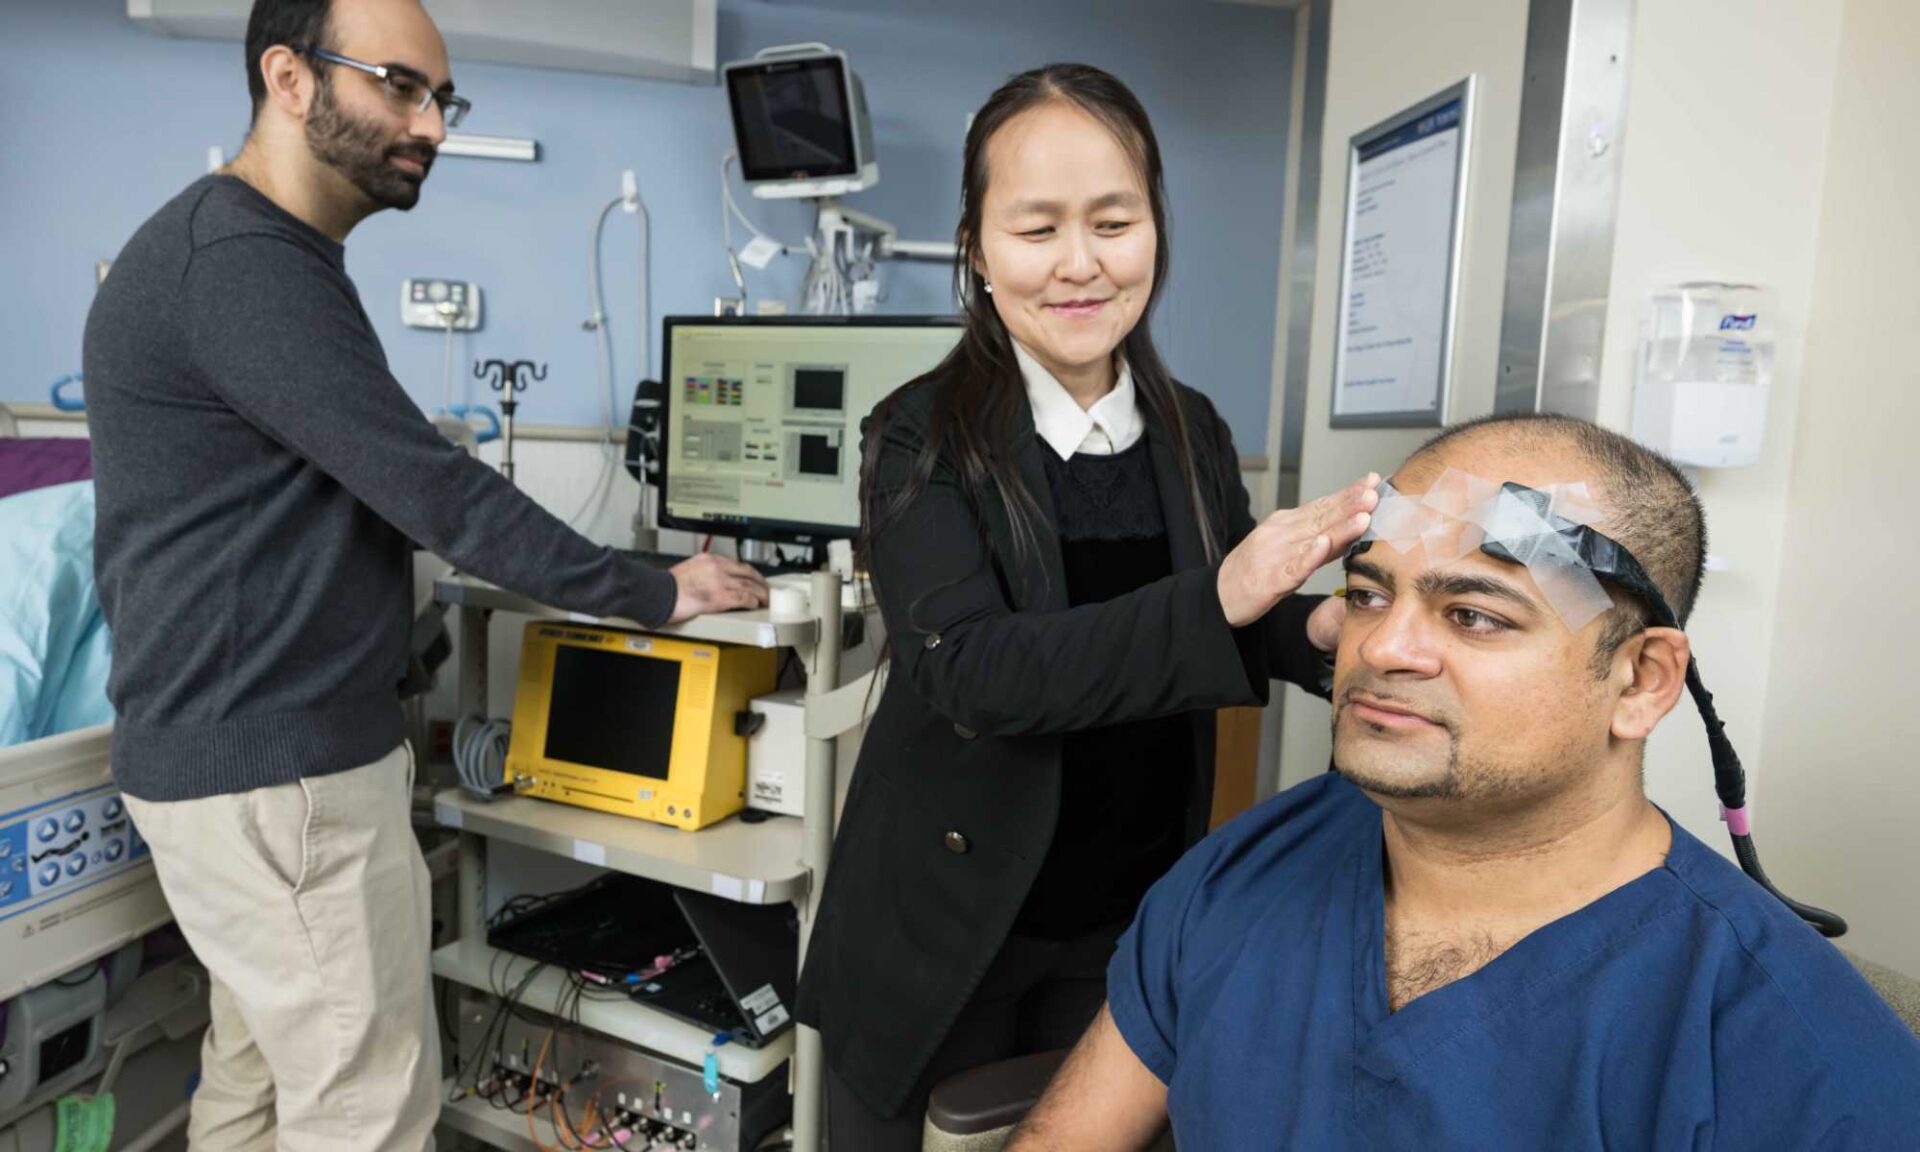 Two researchers and a participant demonstrate how multiple devices linked together can evaluate different aspects of the brain’s health during extracorporeal membrane oxygenation (ECMO) therapy.